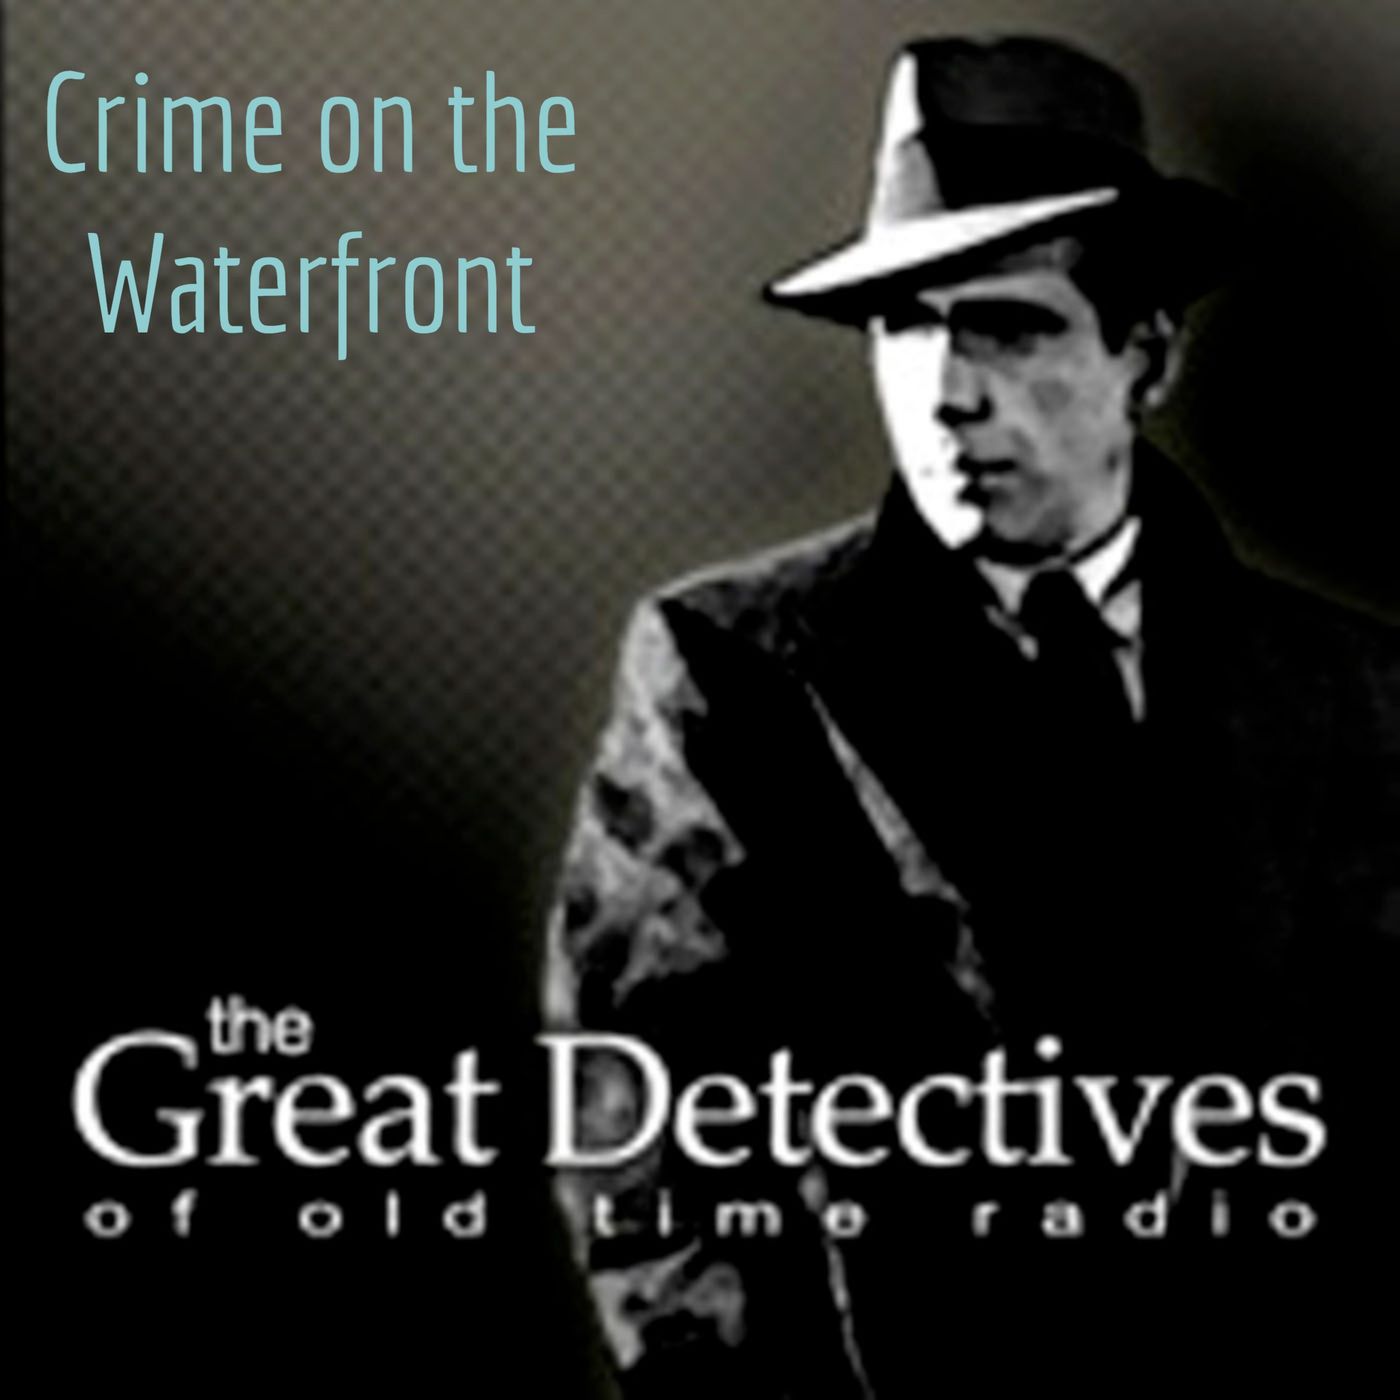 Crime on the Waterfront – The Great Detectives of Old Time Radio